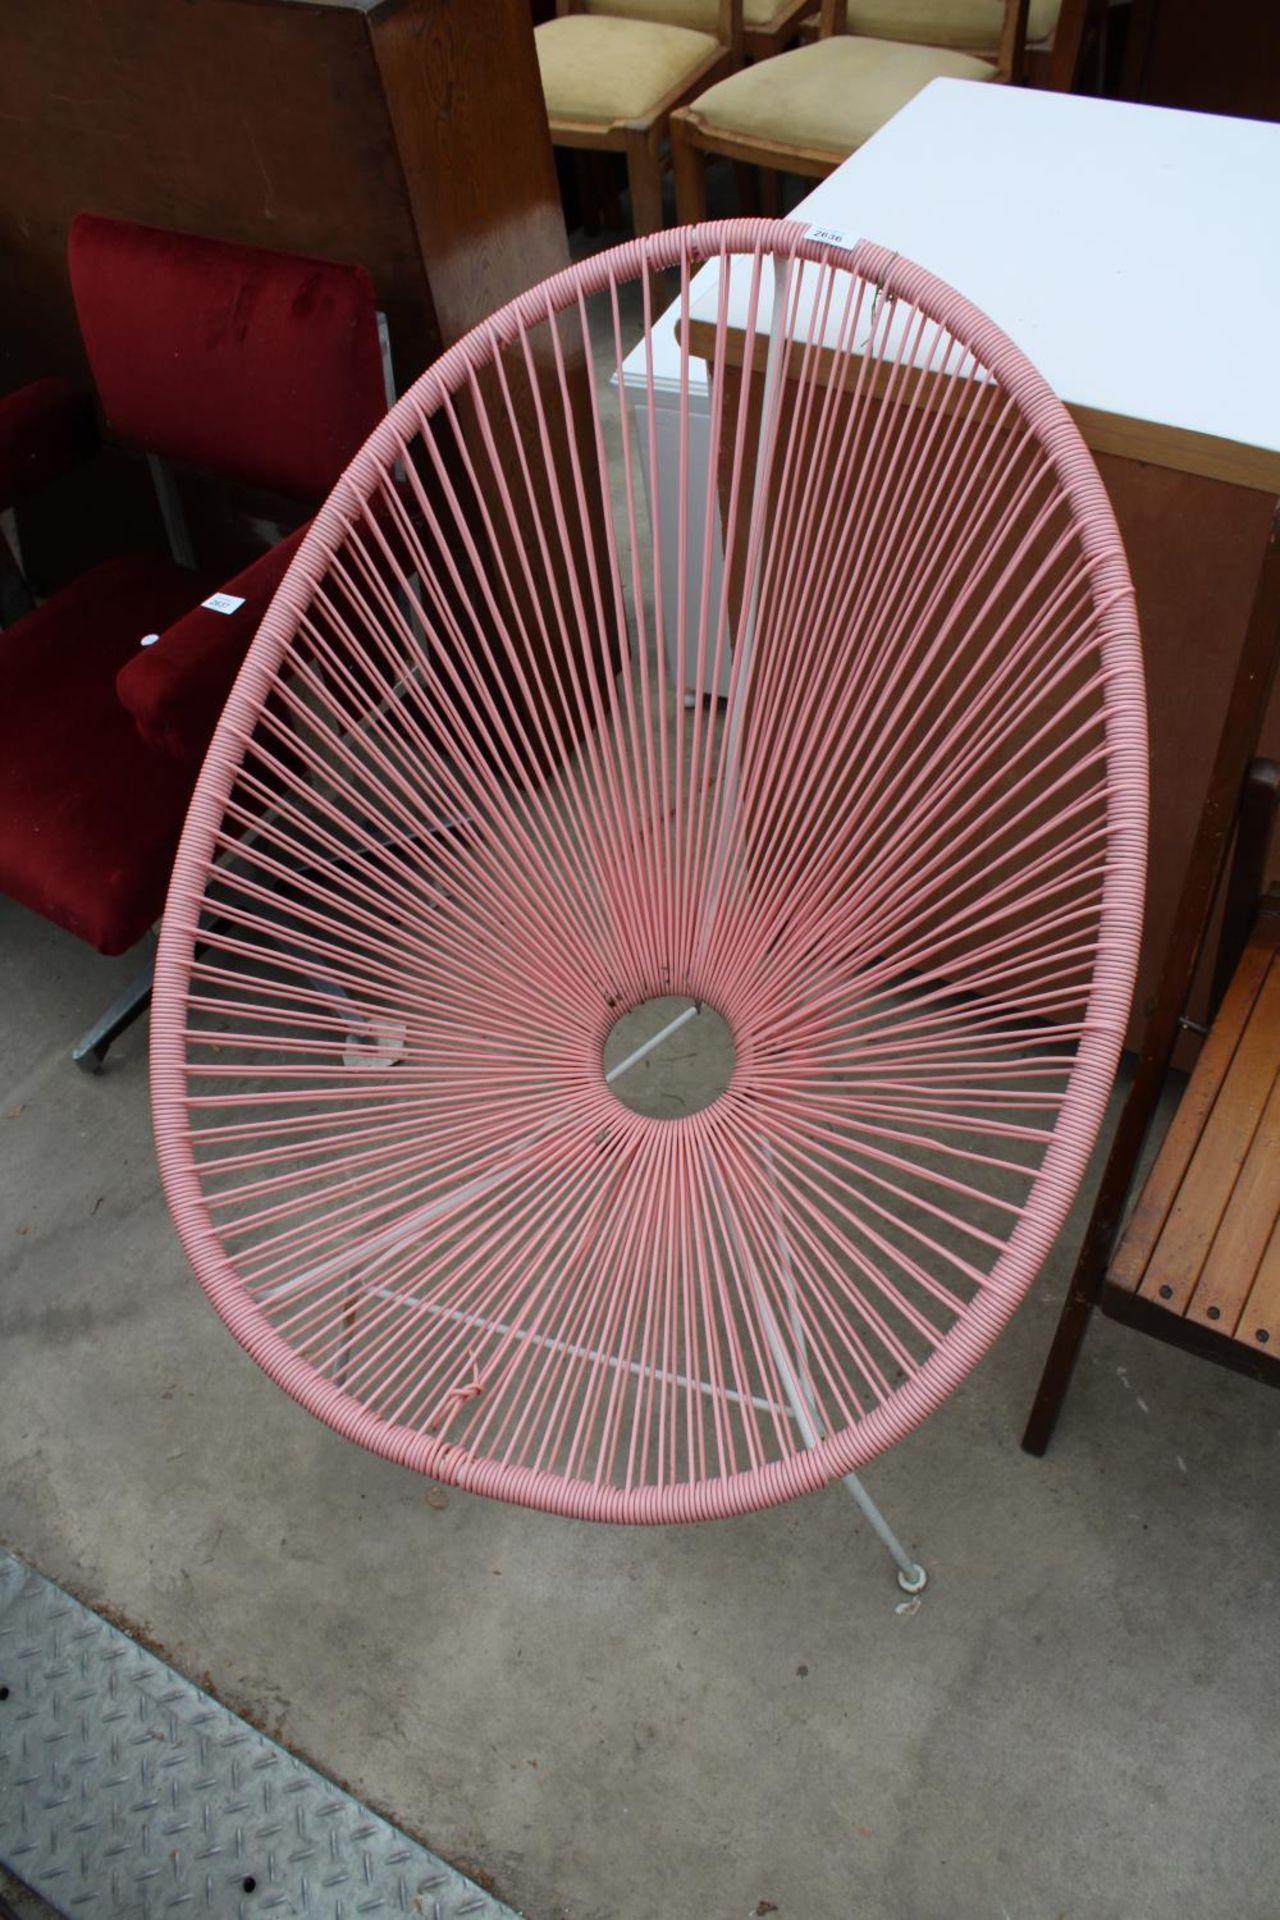 A RETRO PINK VINYL CORD APAPULCO STYLE CHAIR - Image 2 of 2